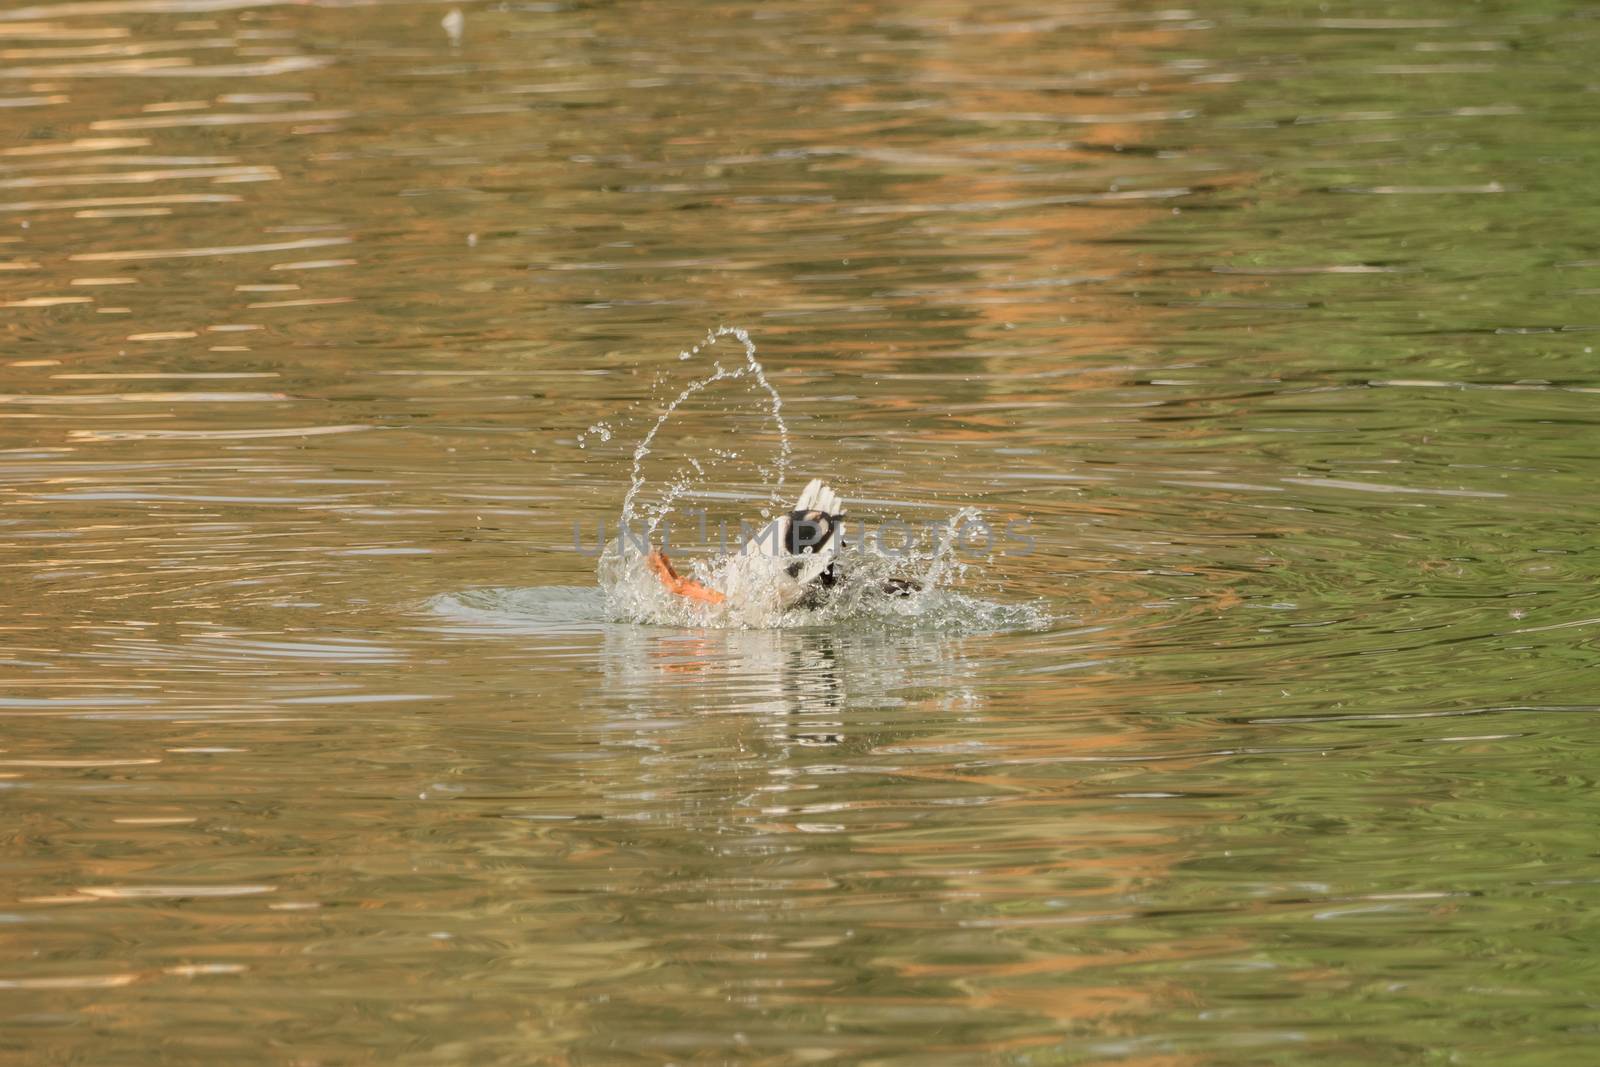 A duck dives into the water